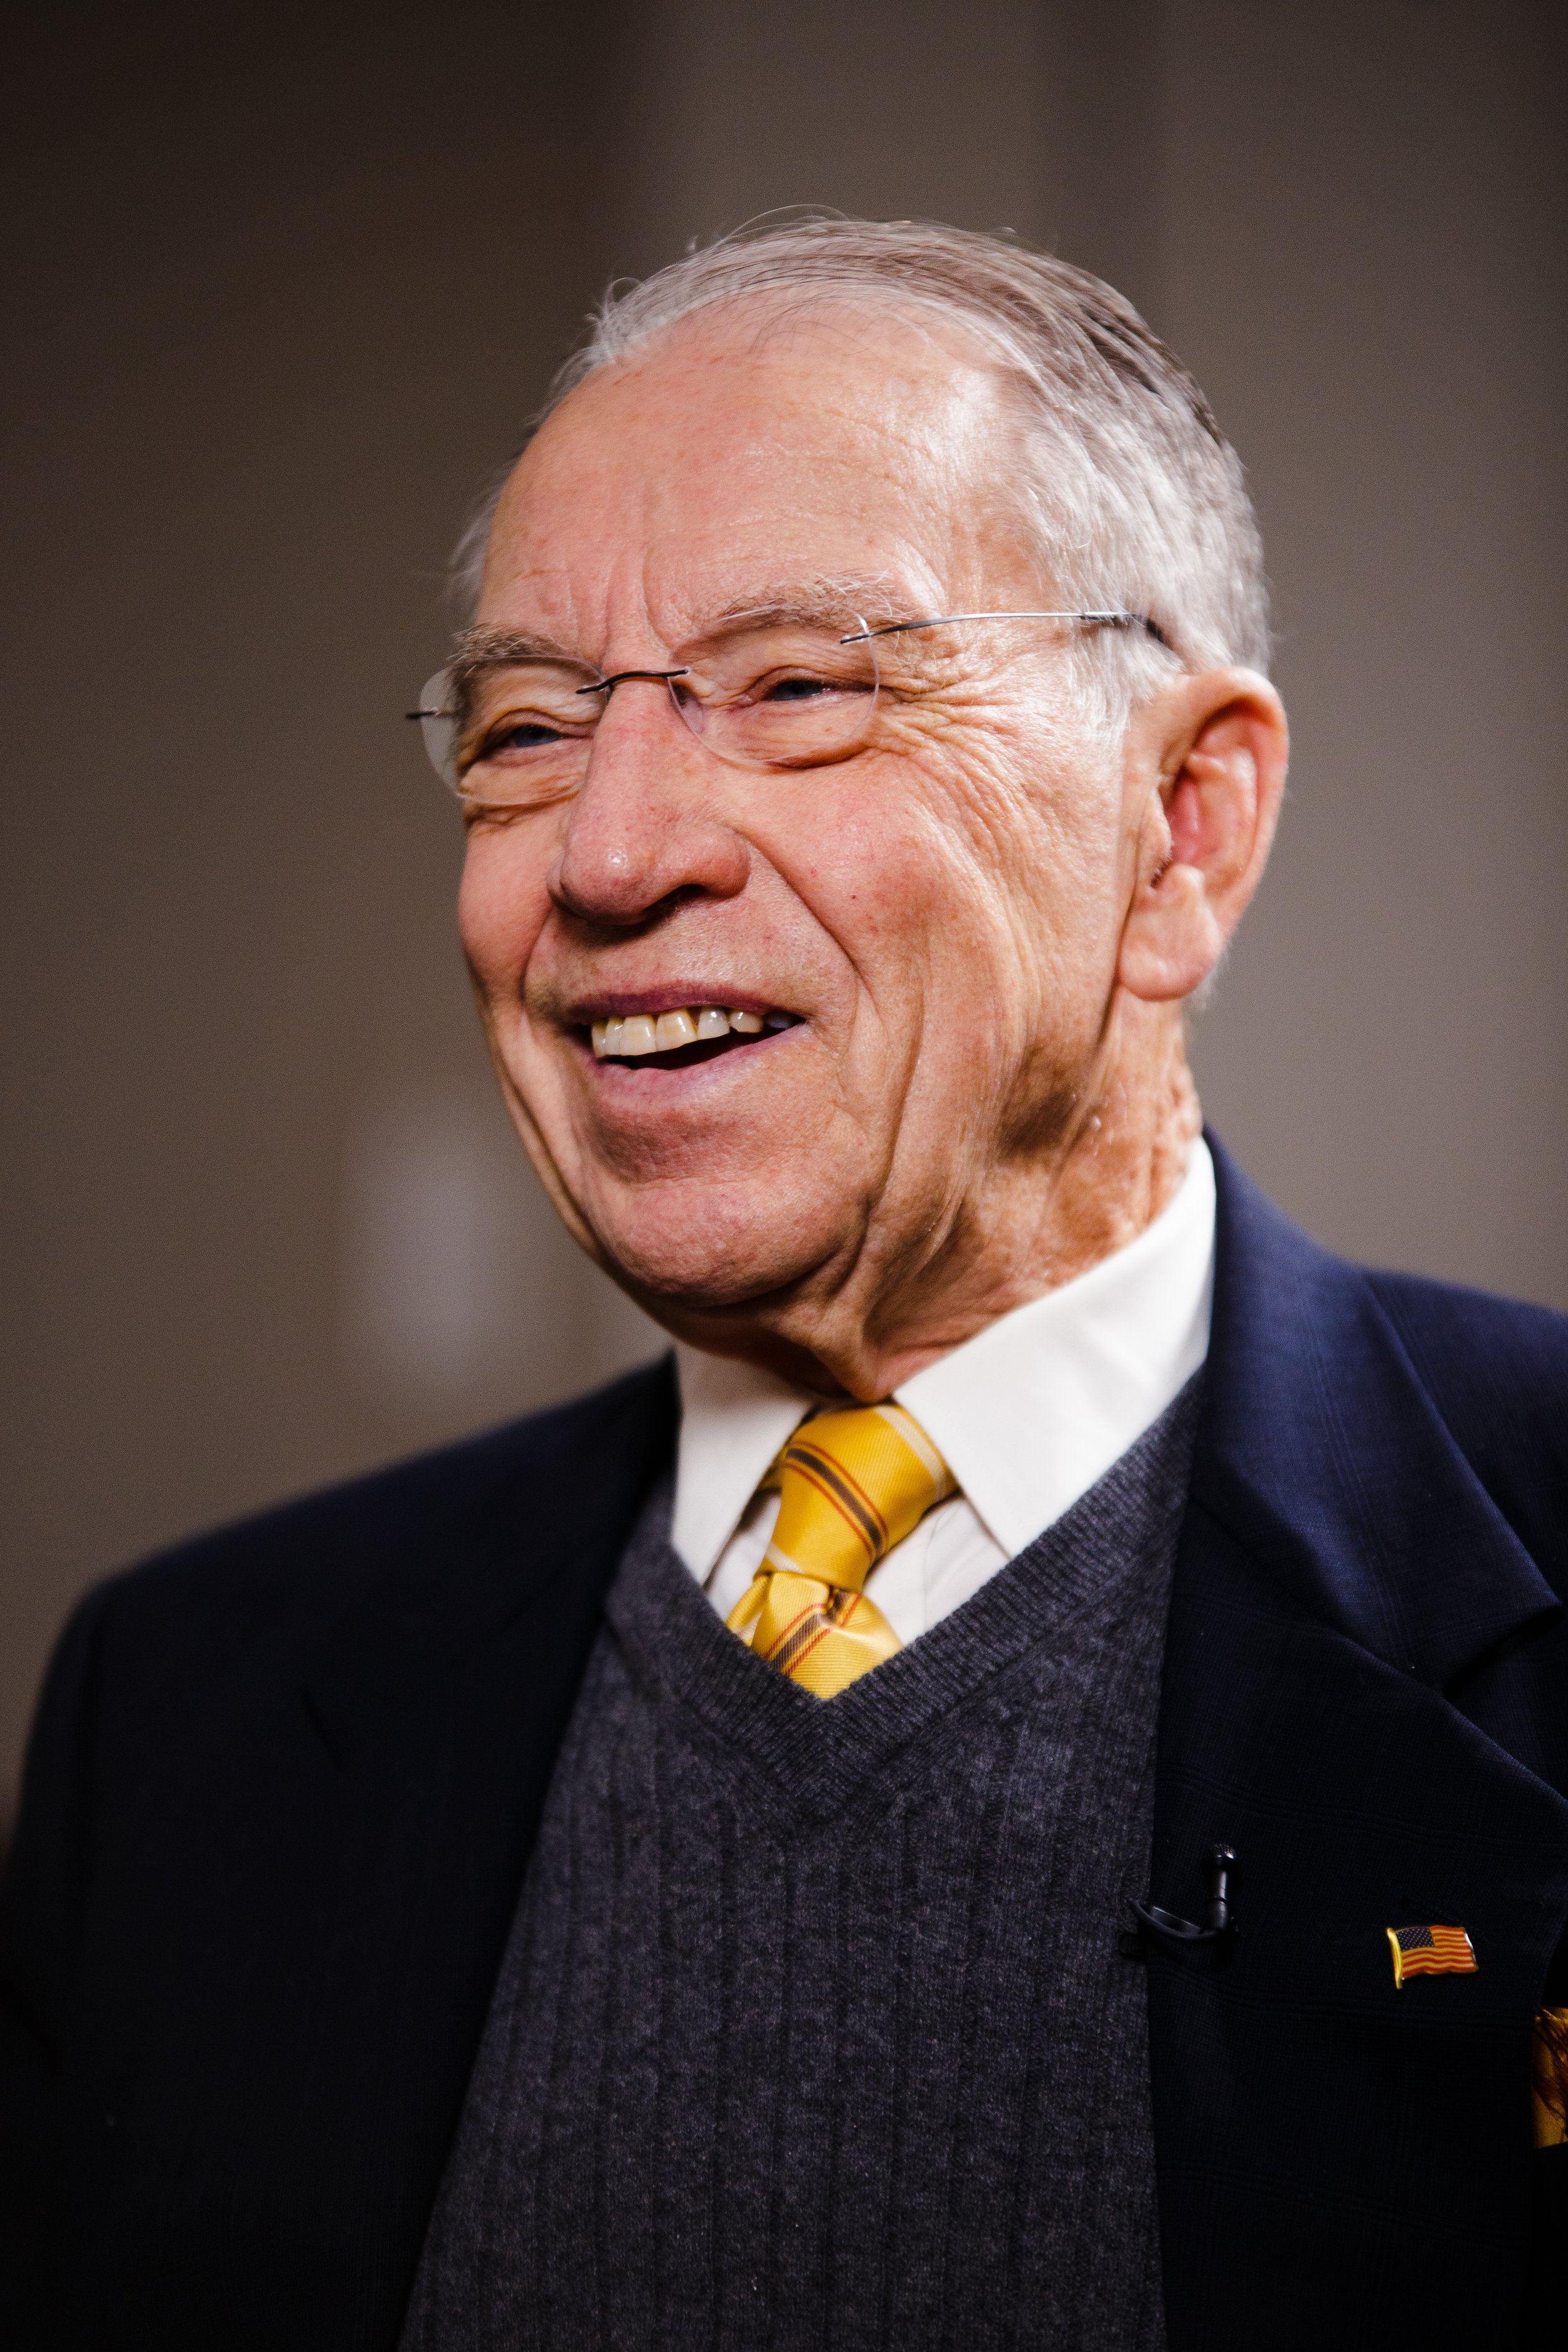  Sen. Chuck Grassley (R-IA) in his office, discussing the late President George H.W. Bush and the current state of civility in government.    December 2018   